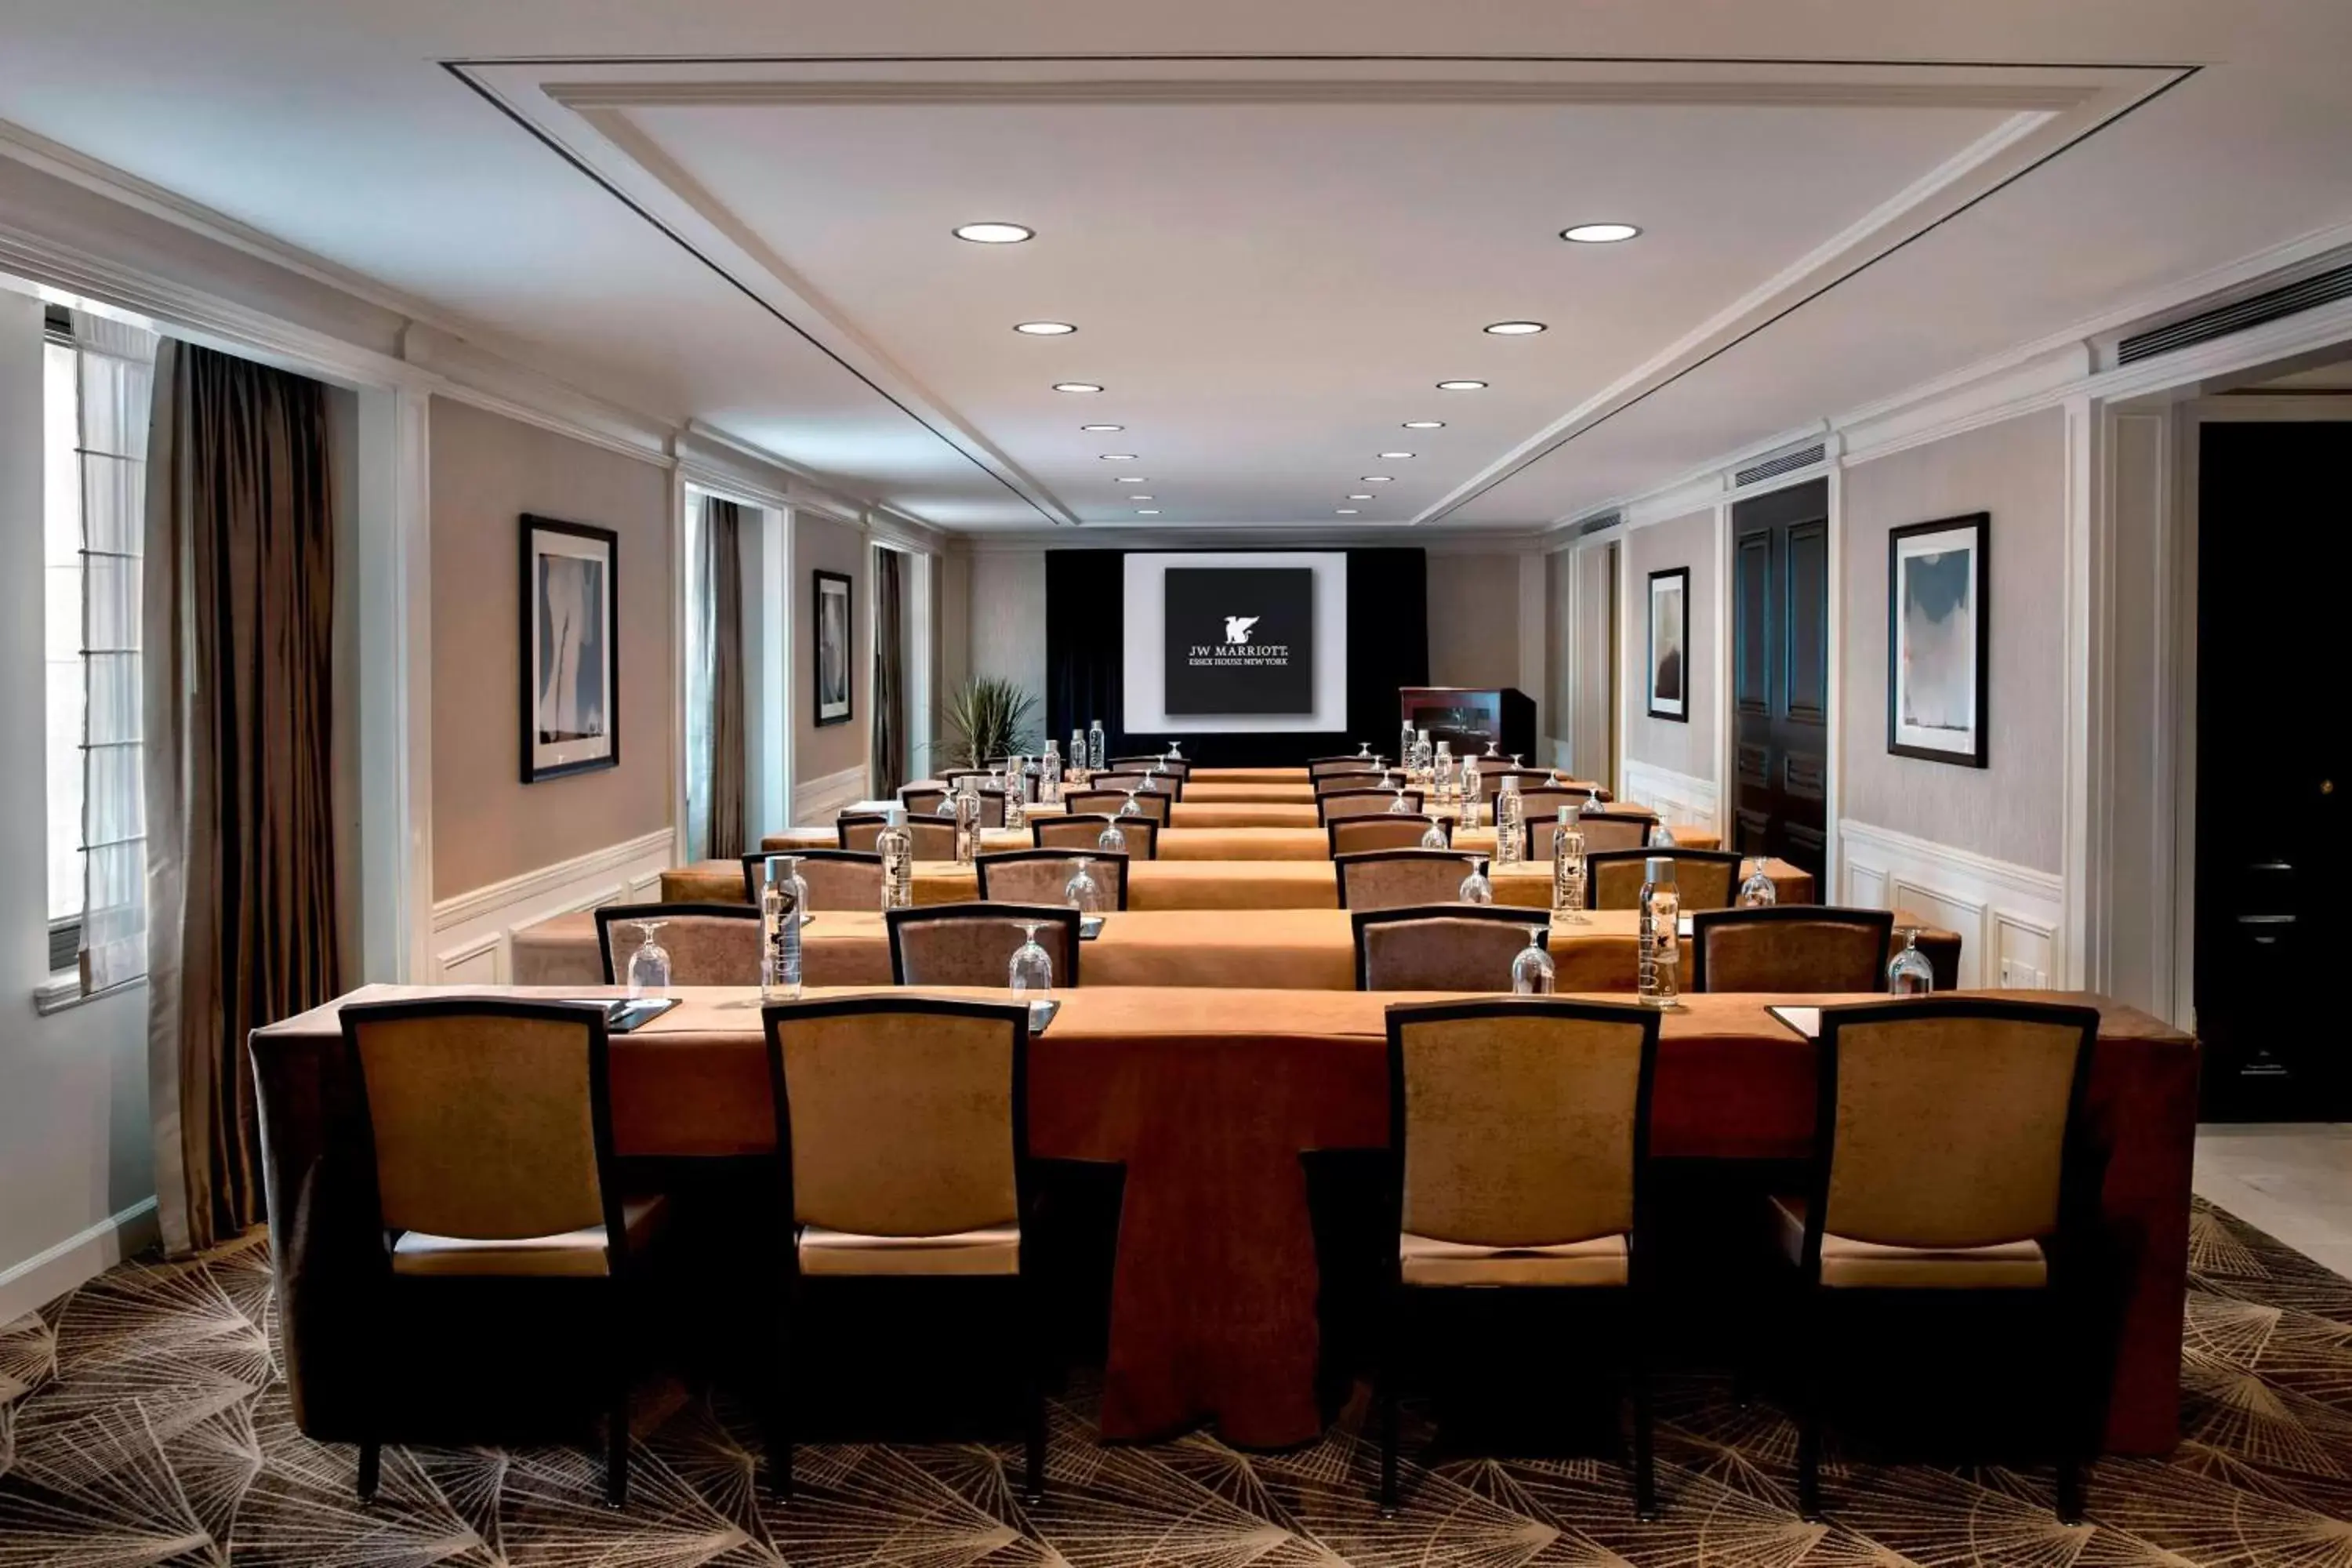 Meeting/conference room in JW Marriott Essex House New York